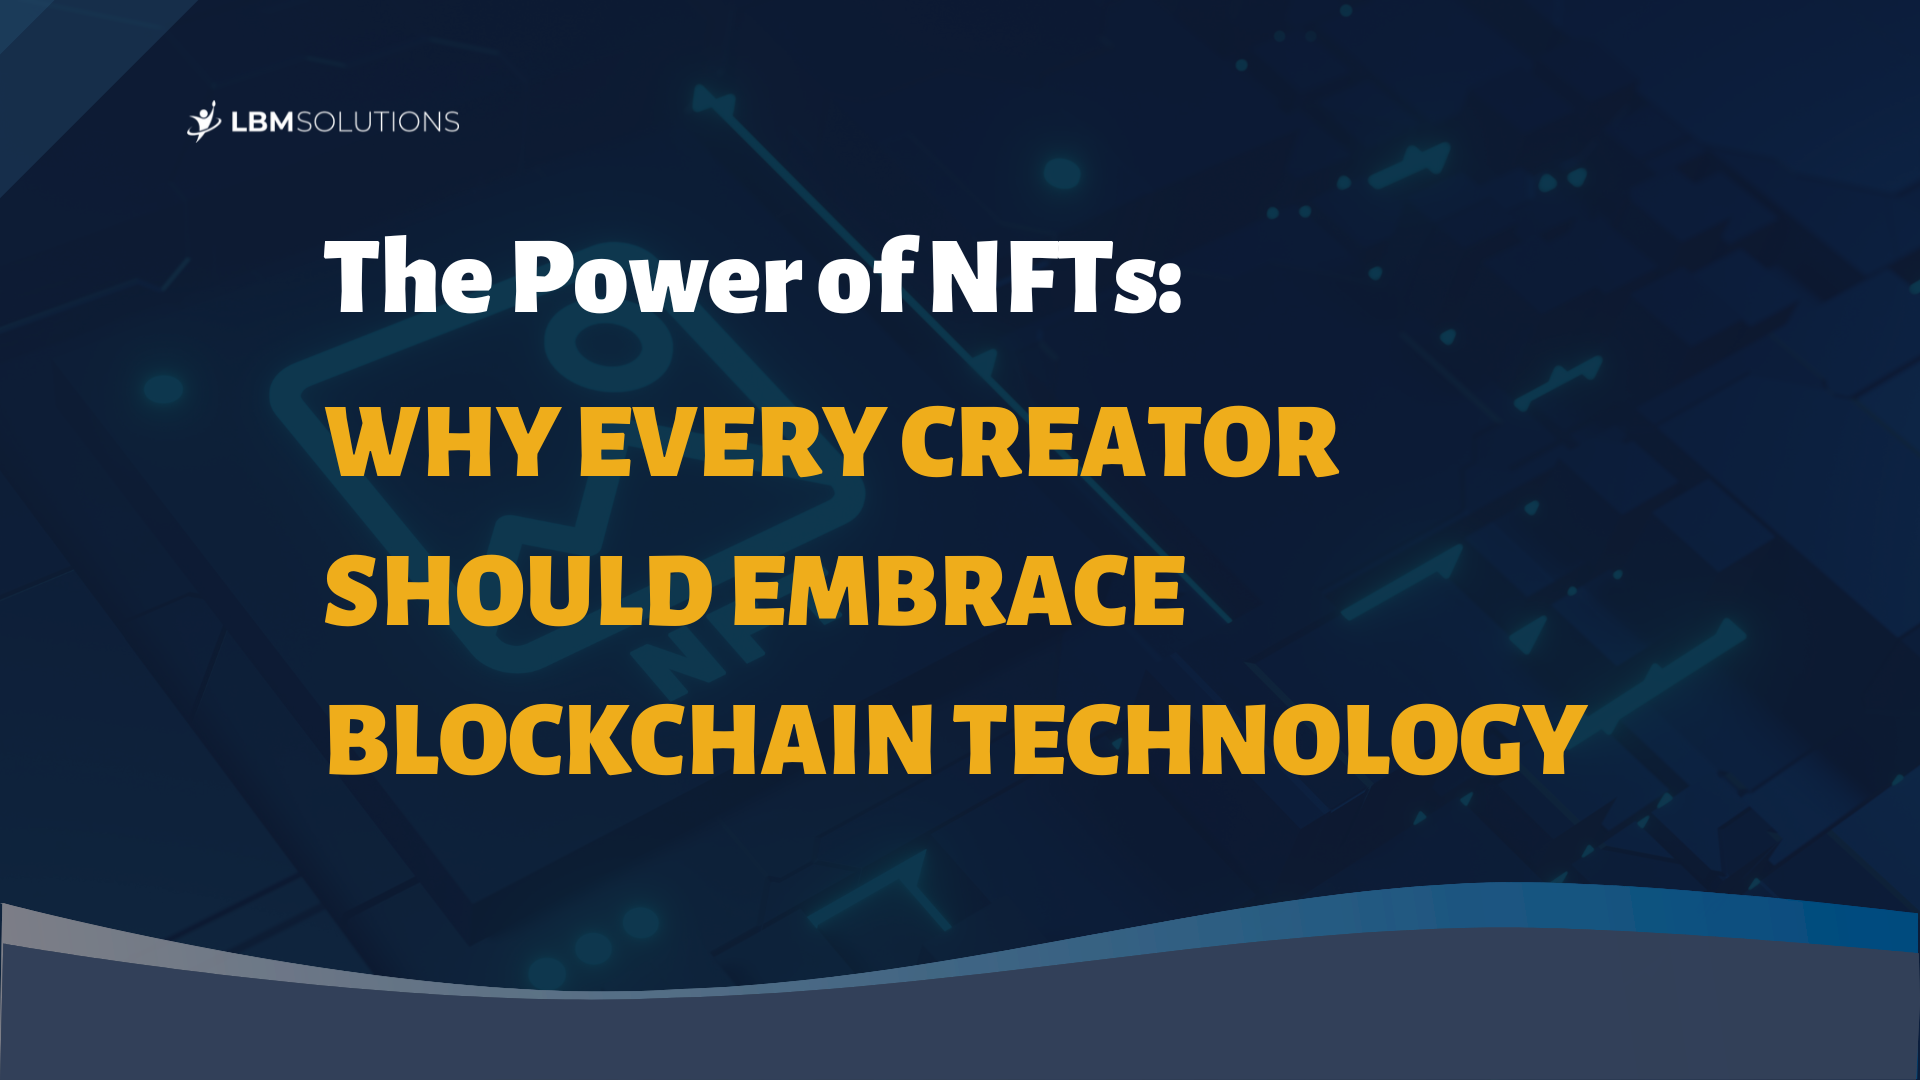 The Power of NFTs